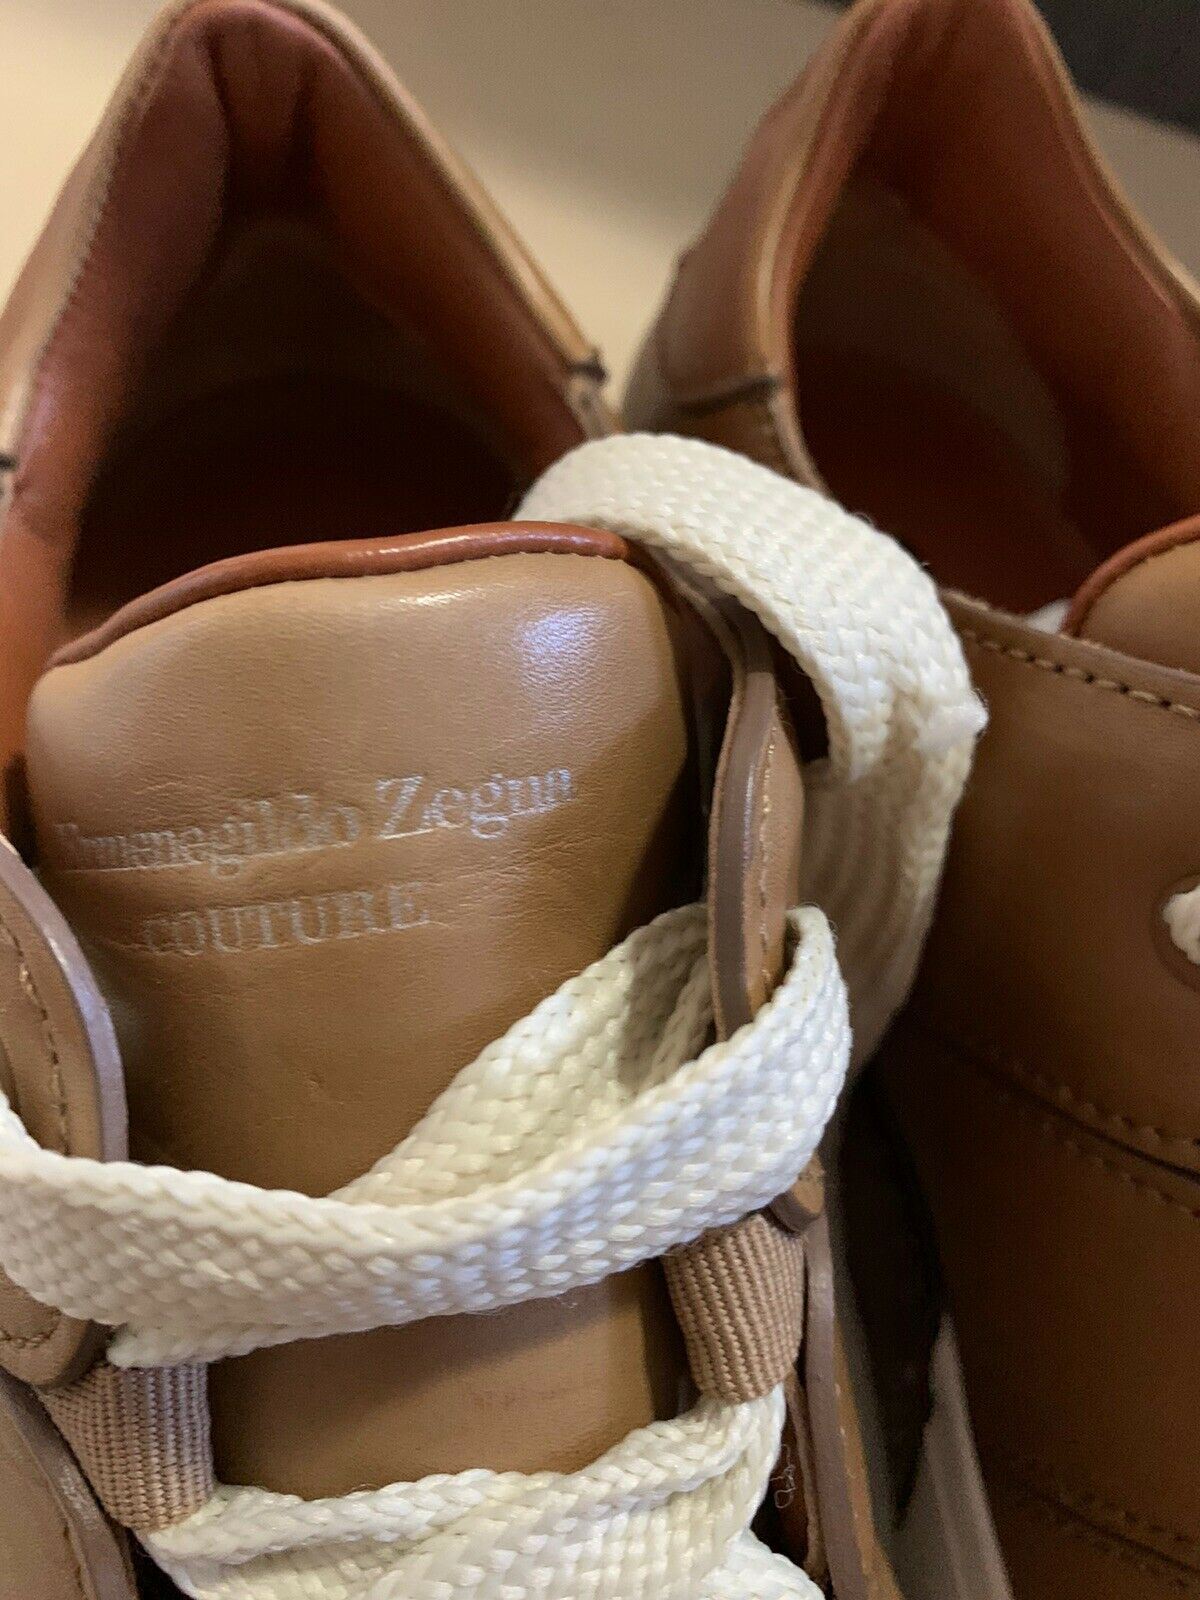 New $795 Ermenegildo Zegna Couture Leather Sneakers Shoes MD Beige 9.5 US